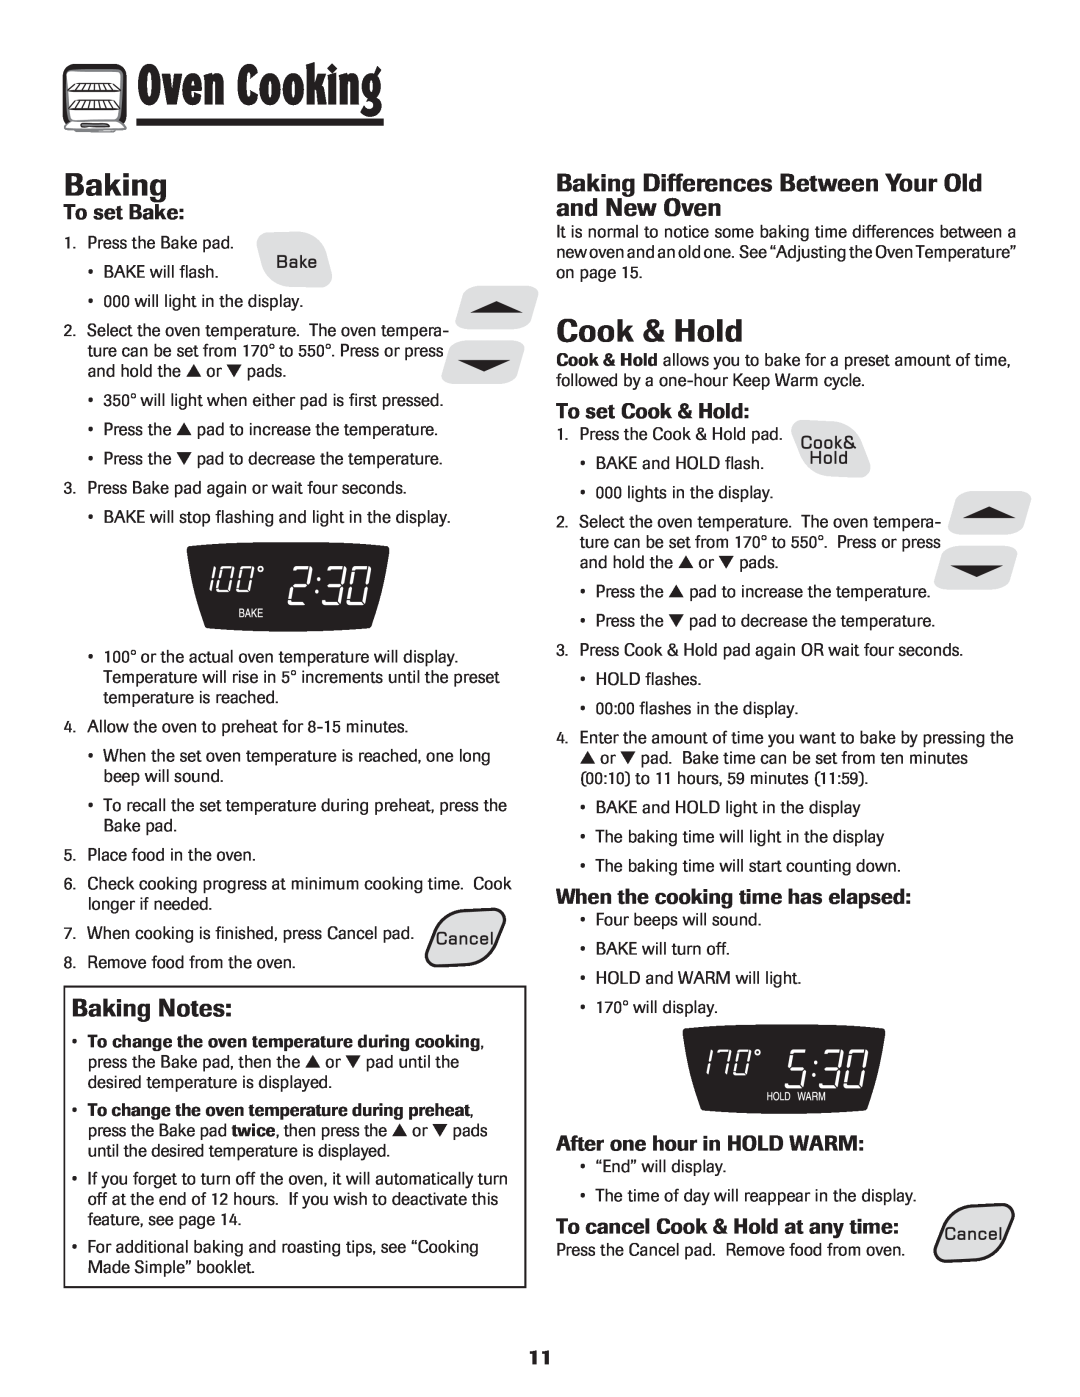 Amana 8113P454-60 warranty Cook & Hold, Baking Notes, Baking Differences Between Your Old and New Oven, To set Bake 